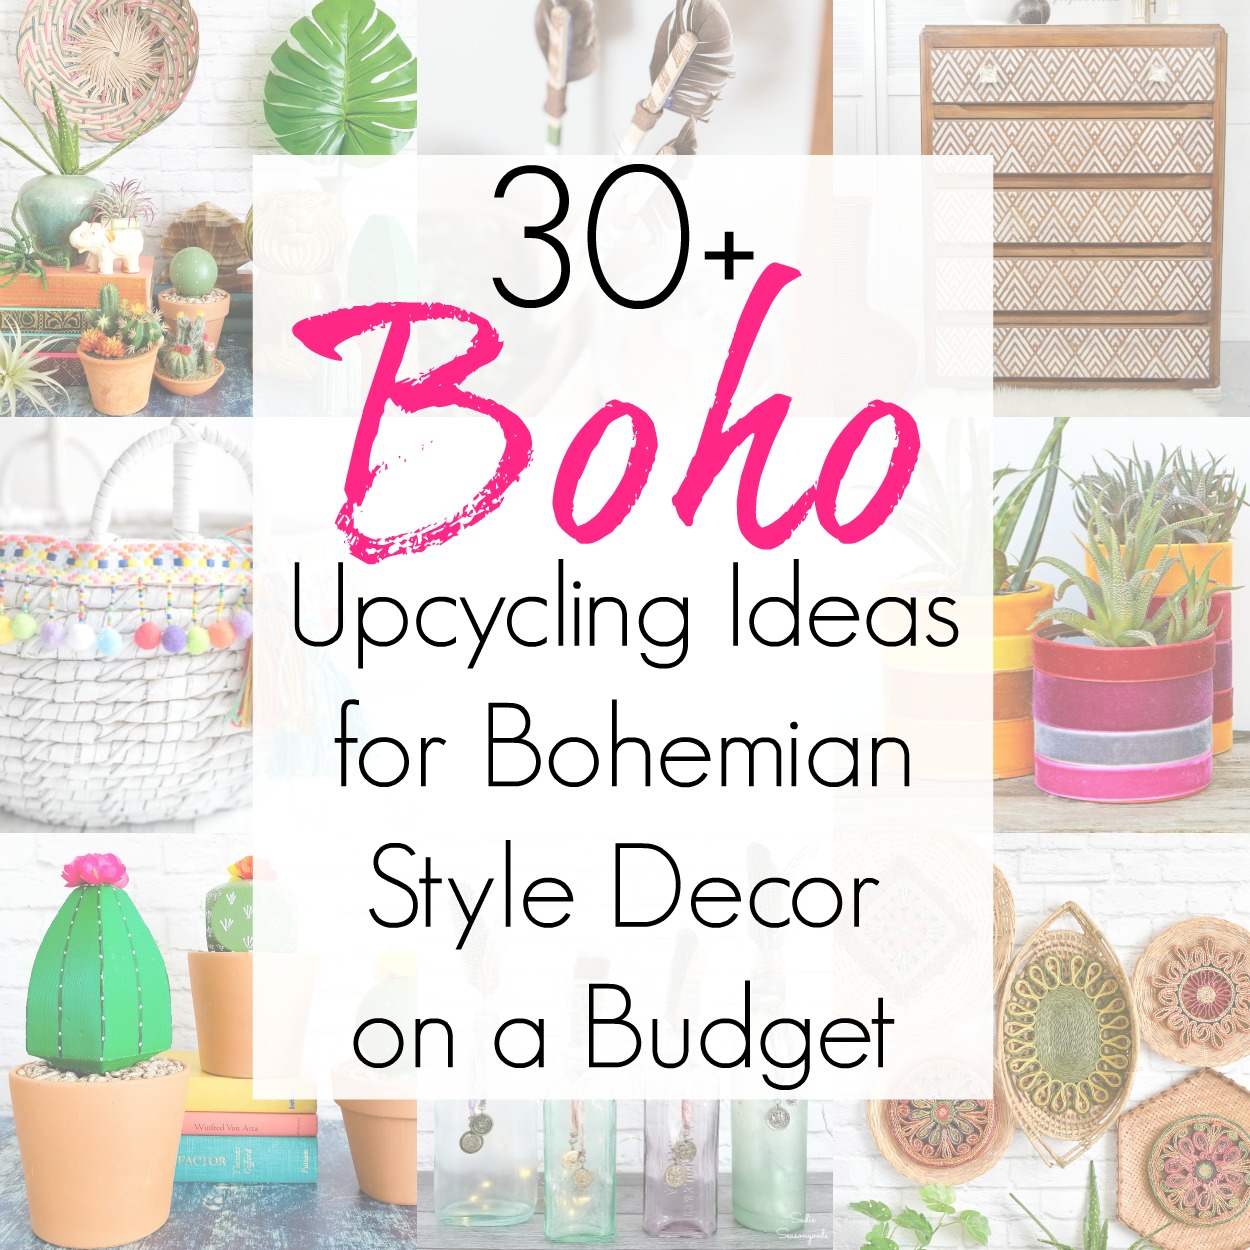 Bohemian Style Decor on a Budget with Upcycling Projects